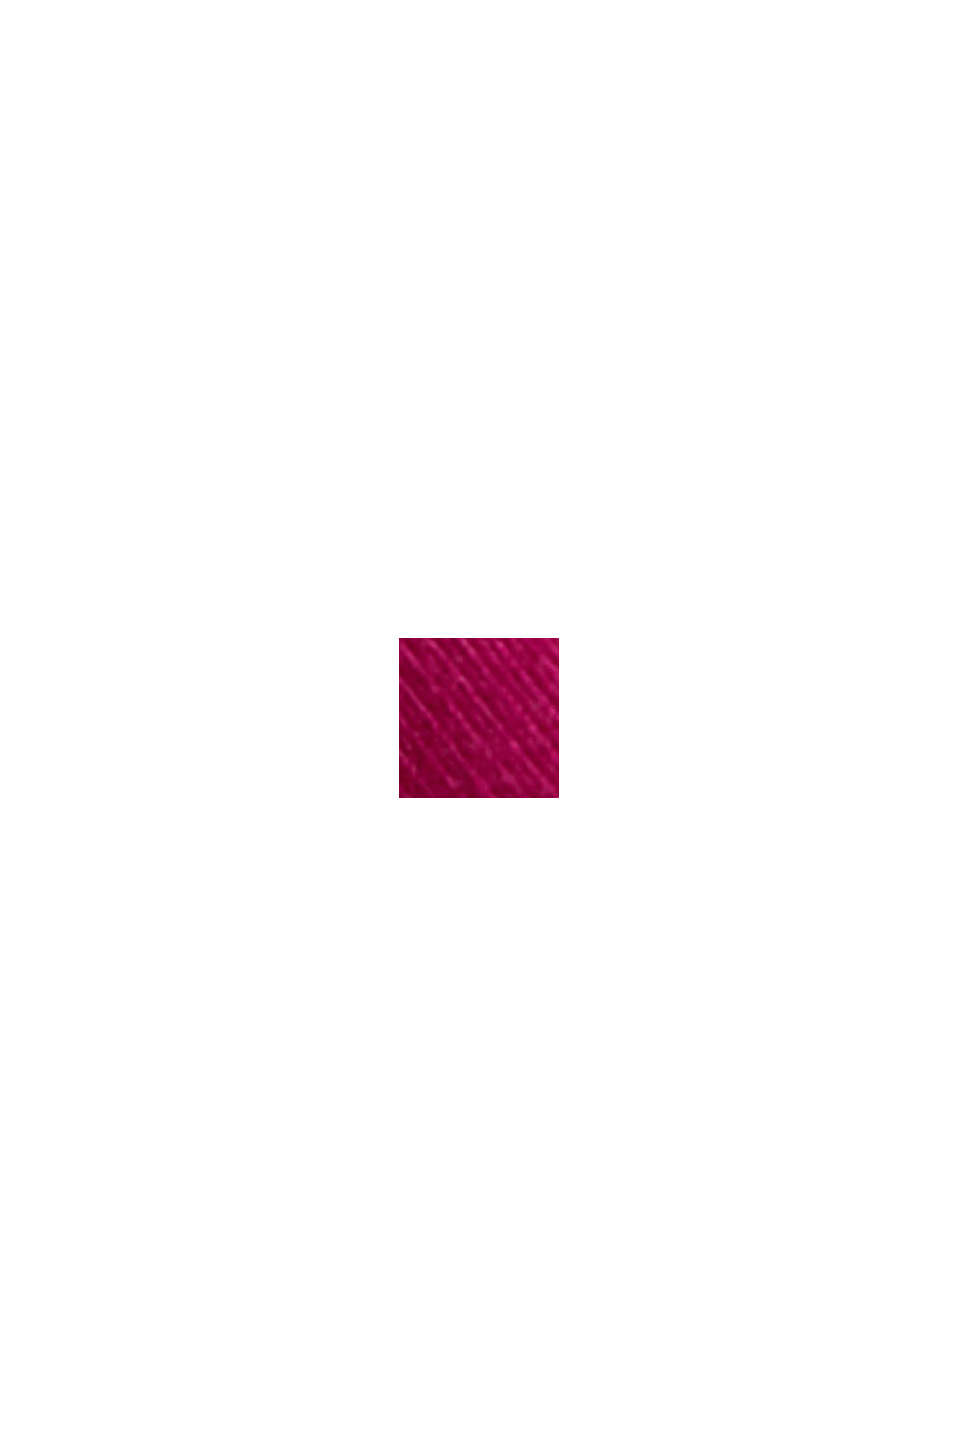 Housut, BERRY RED, swatch